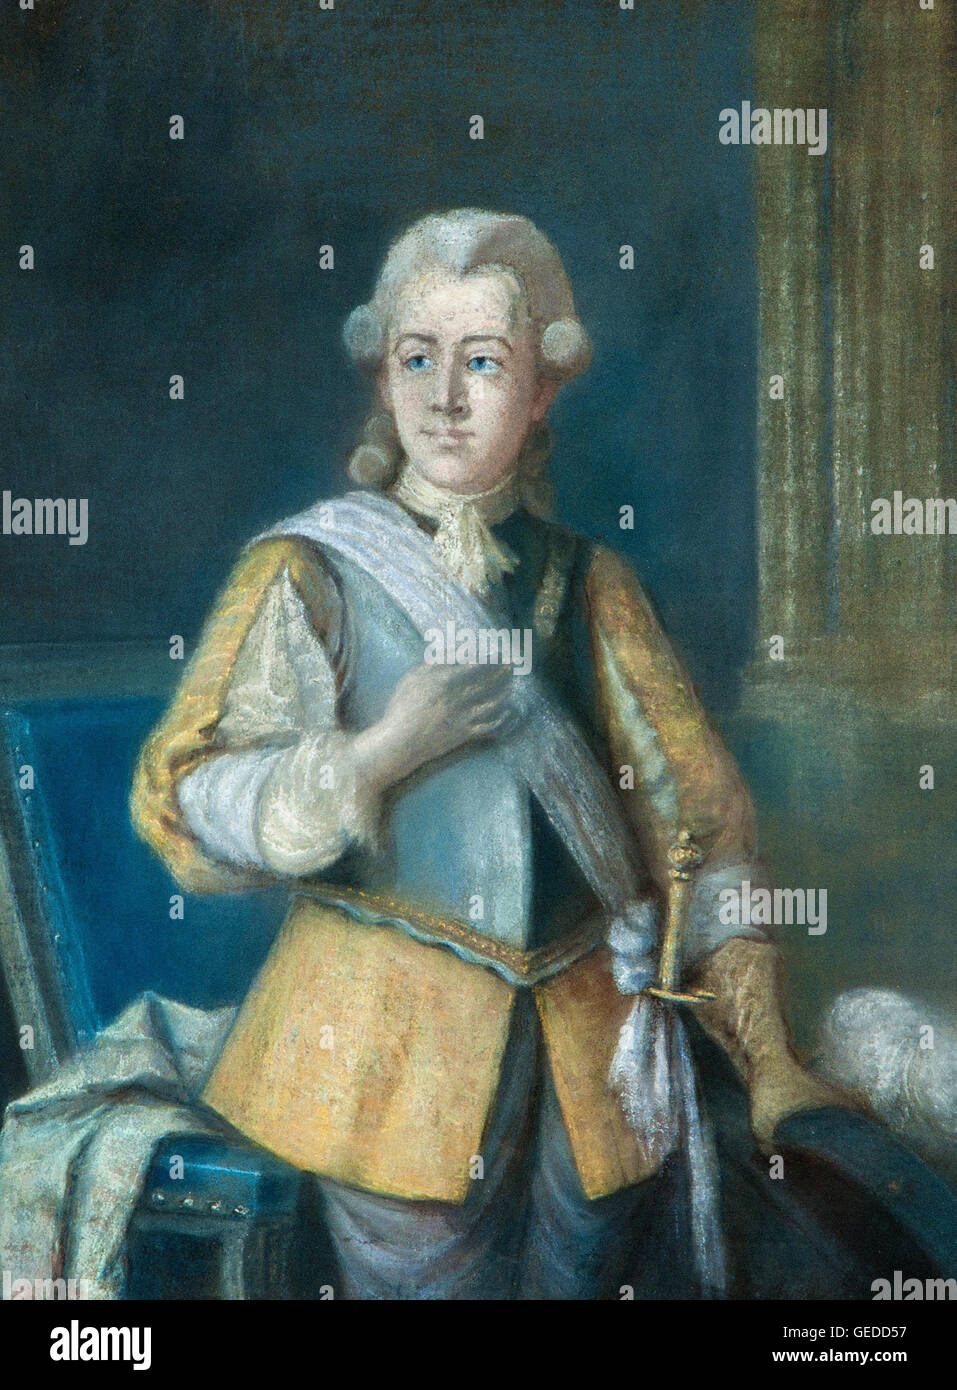 Attributed to Gustaf L Lundberg - Gustav III, King of Sweden 1772-1792, in a Gustavus Adolphus inspired dress Stock Photo